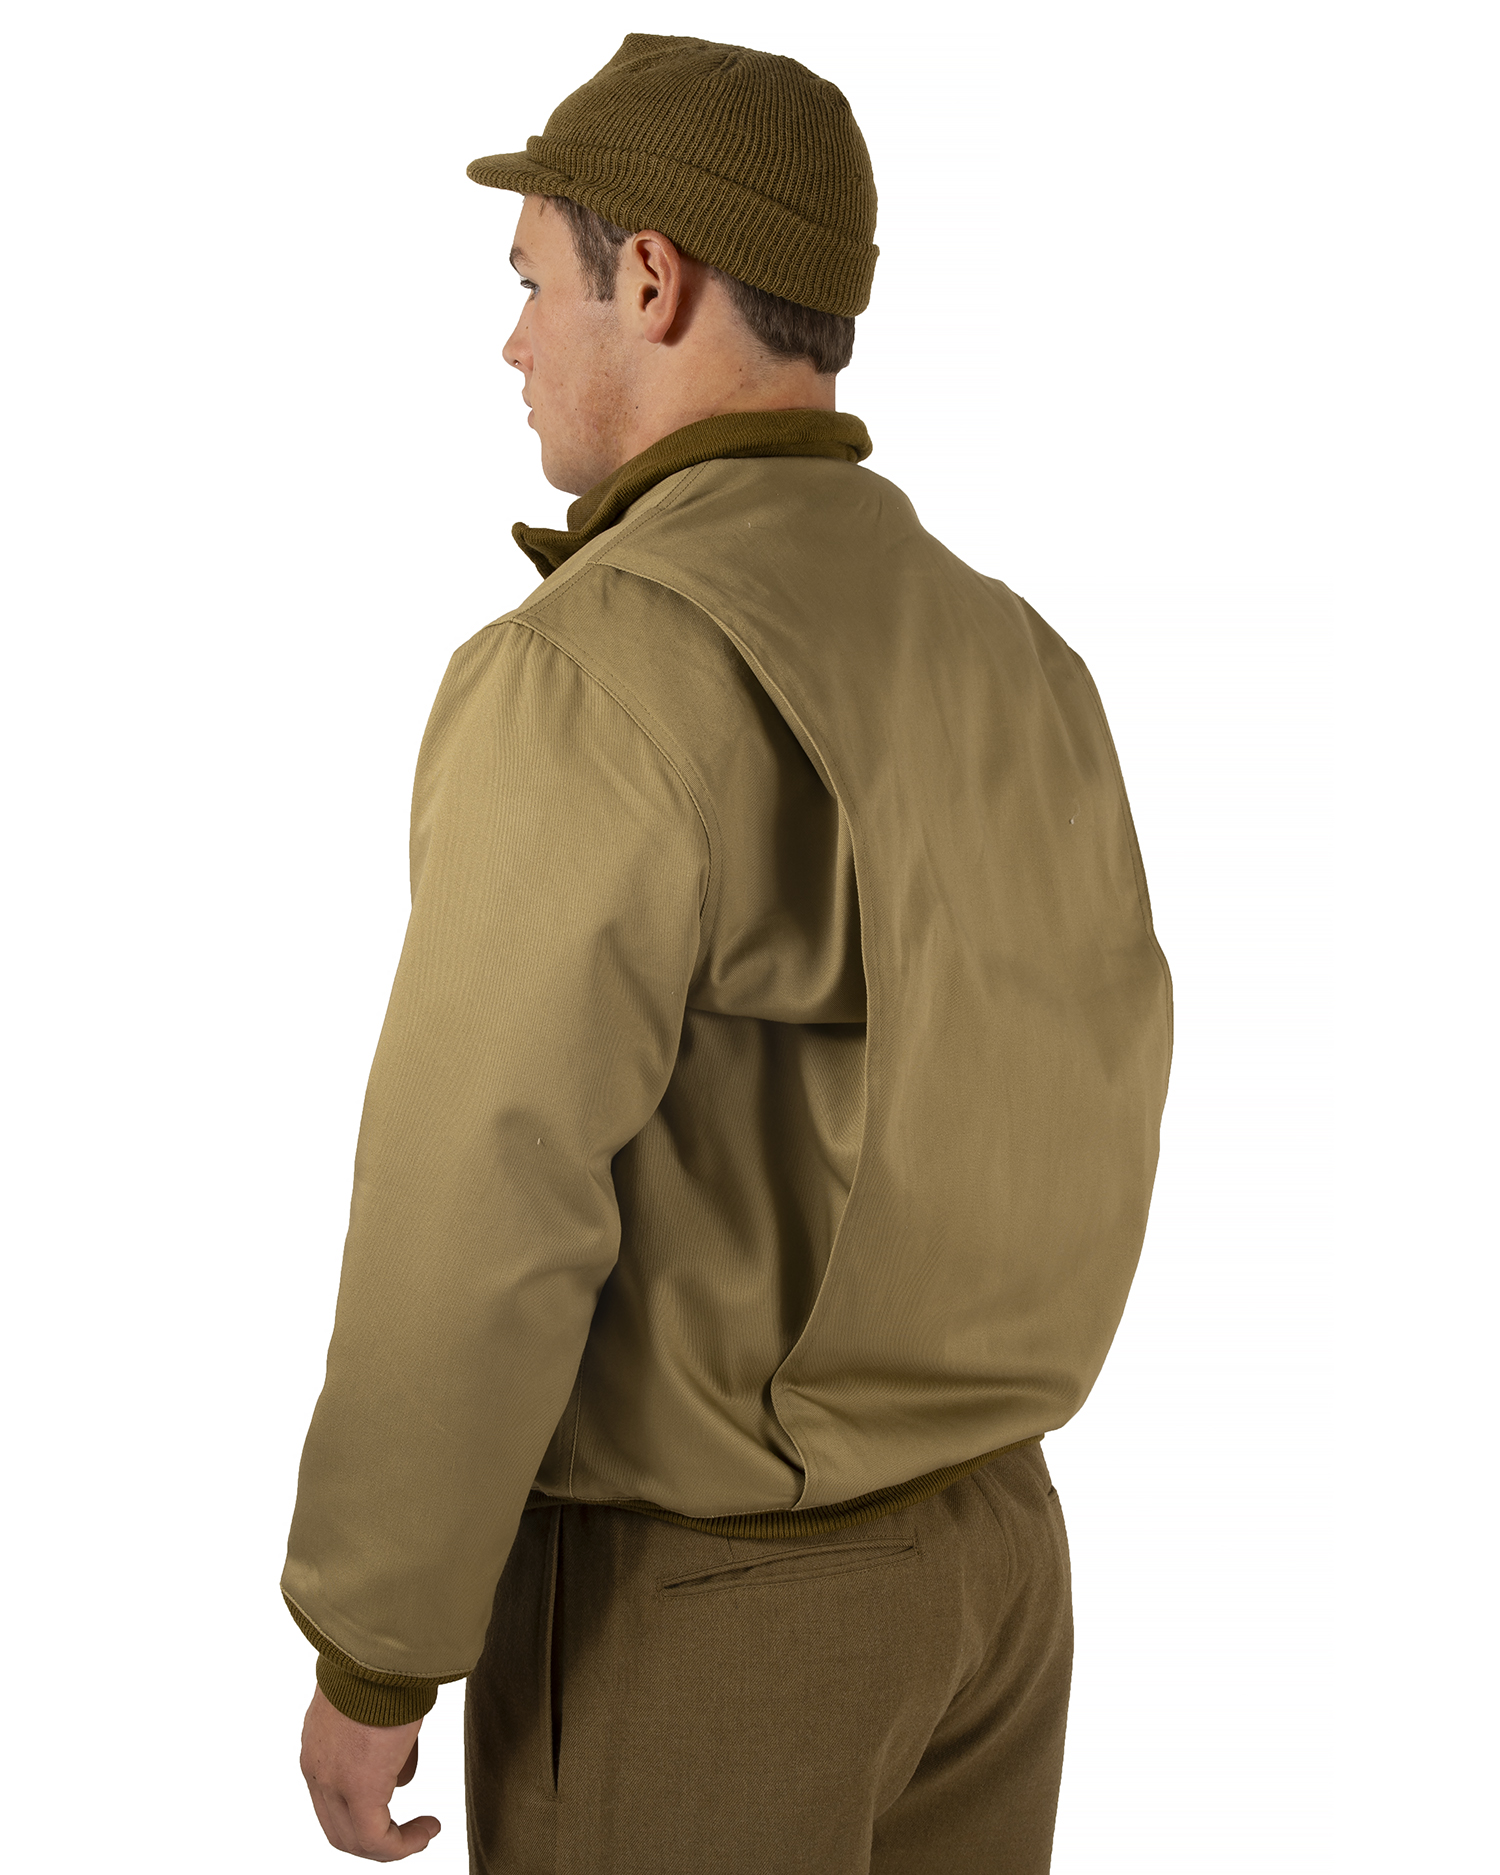 Jacket, Combat, Winter (First model tanker jacket, with patch pockets) –  WWII Impressions, Inc.